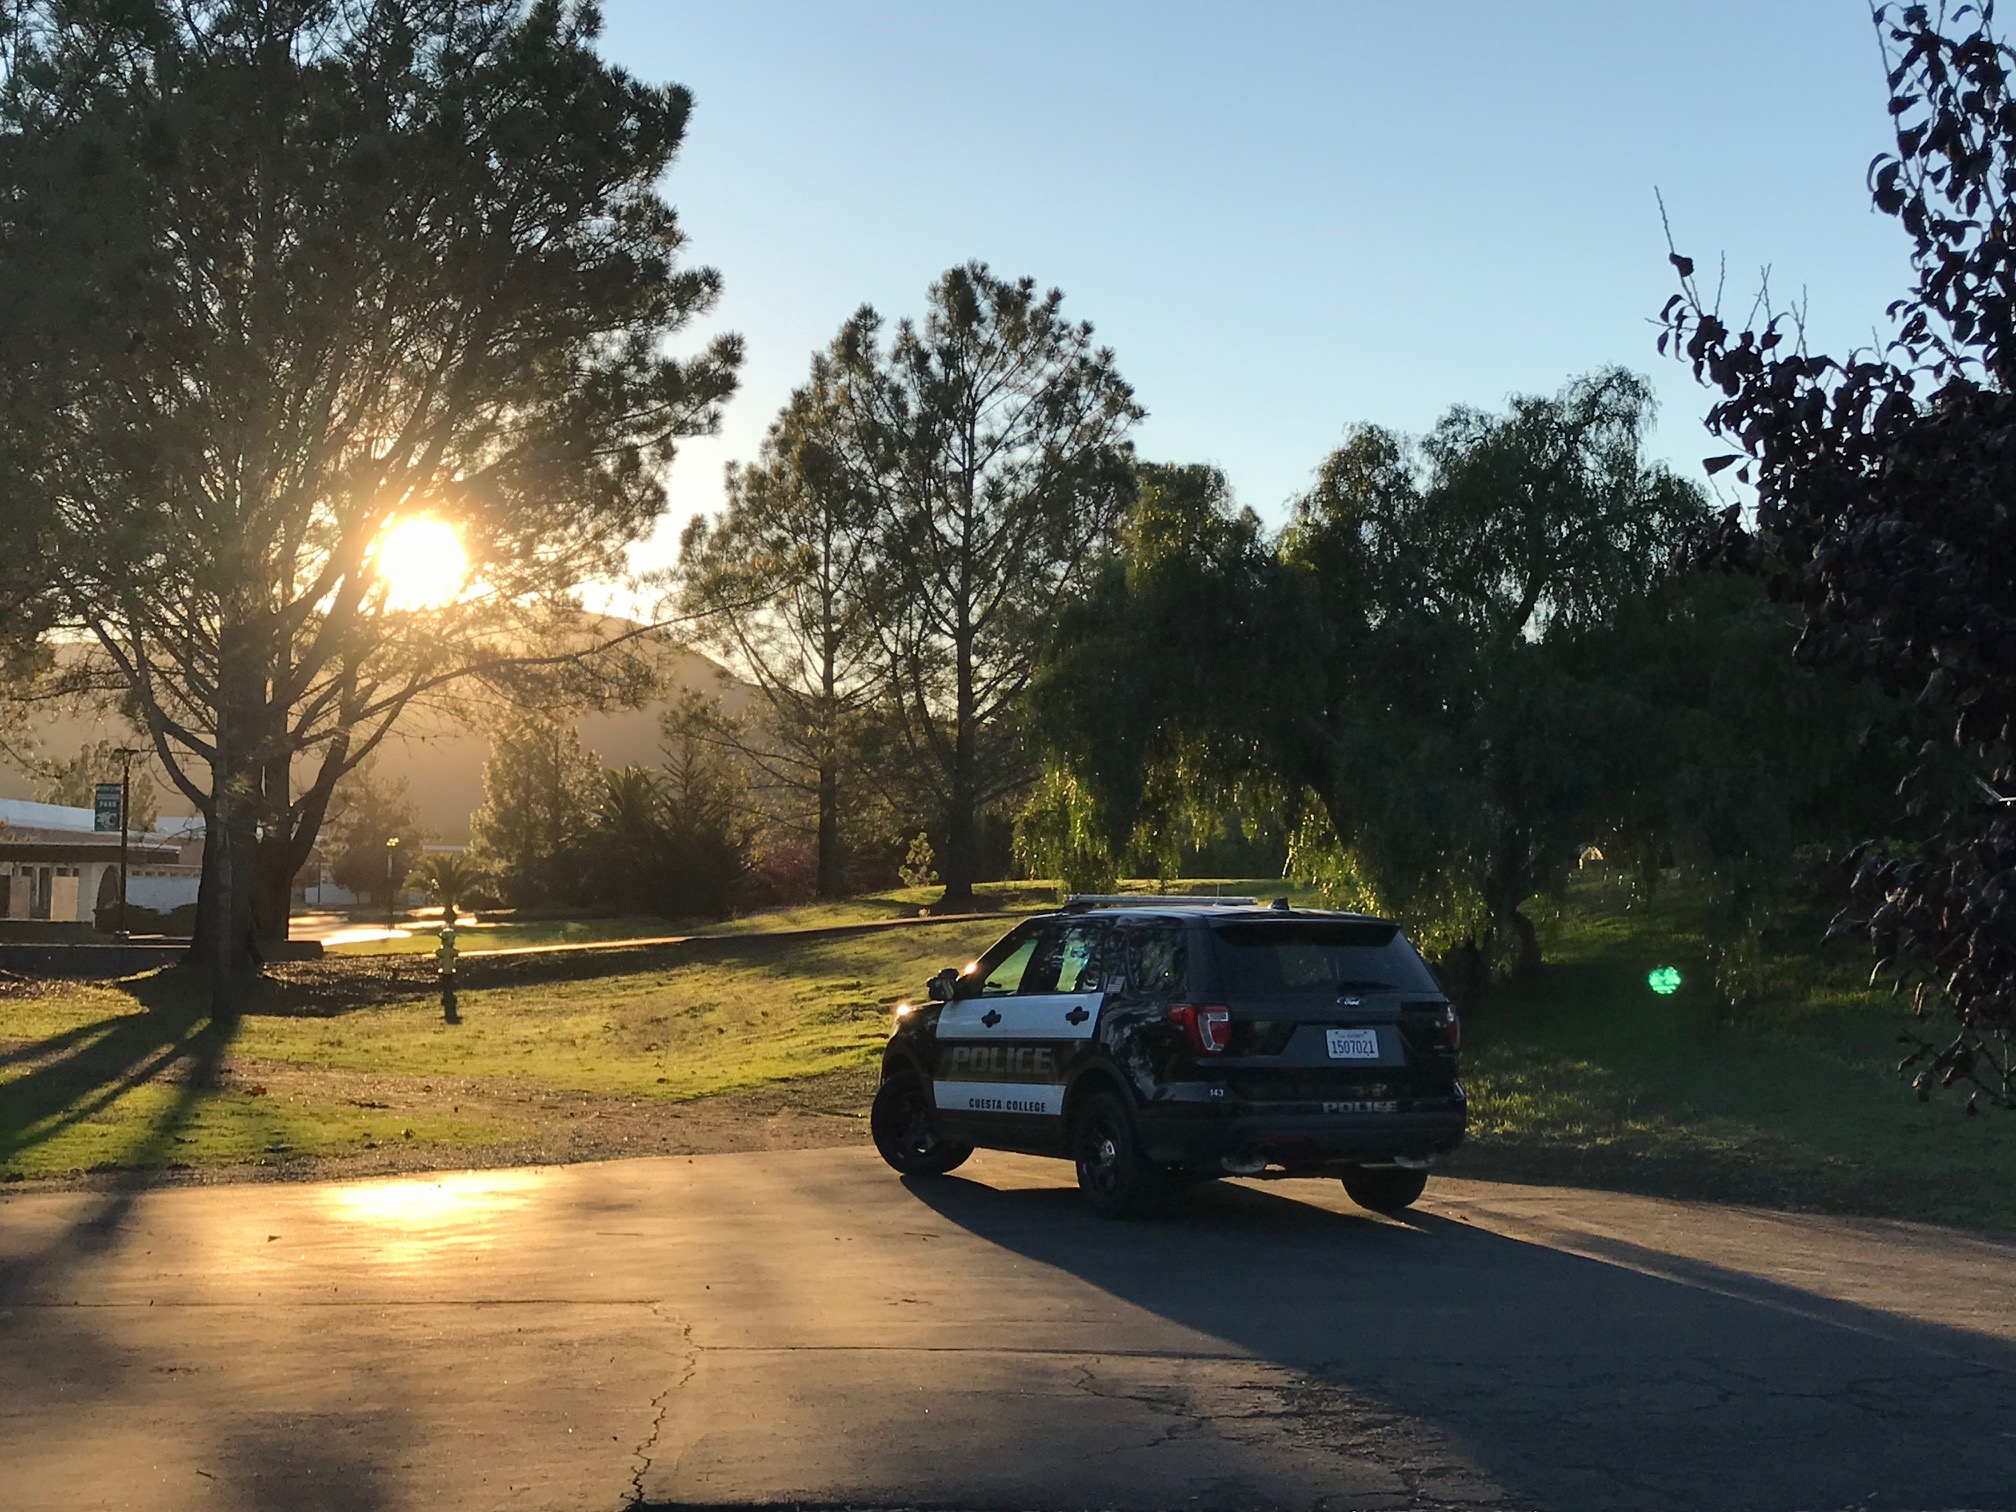 Campus Police vehicle with sunset